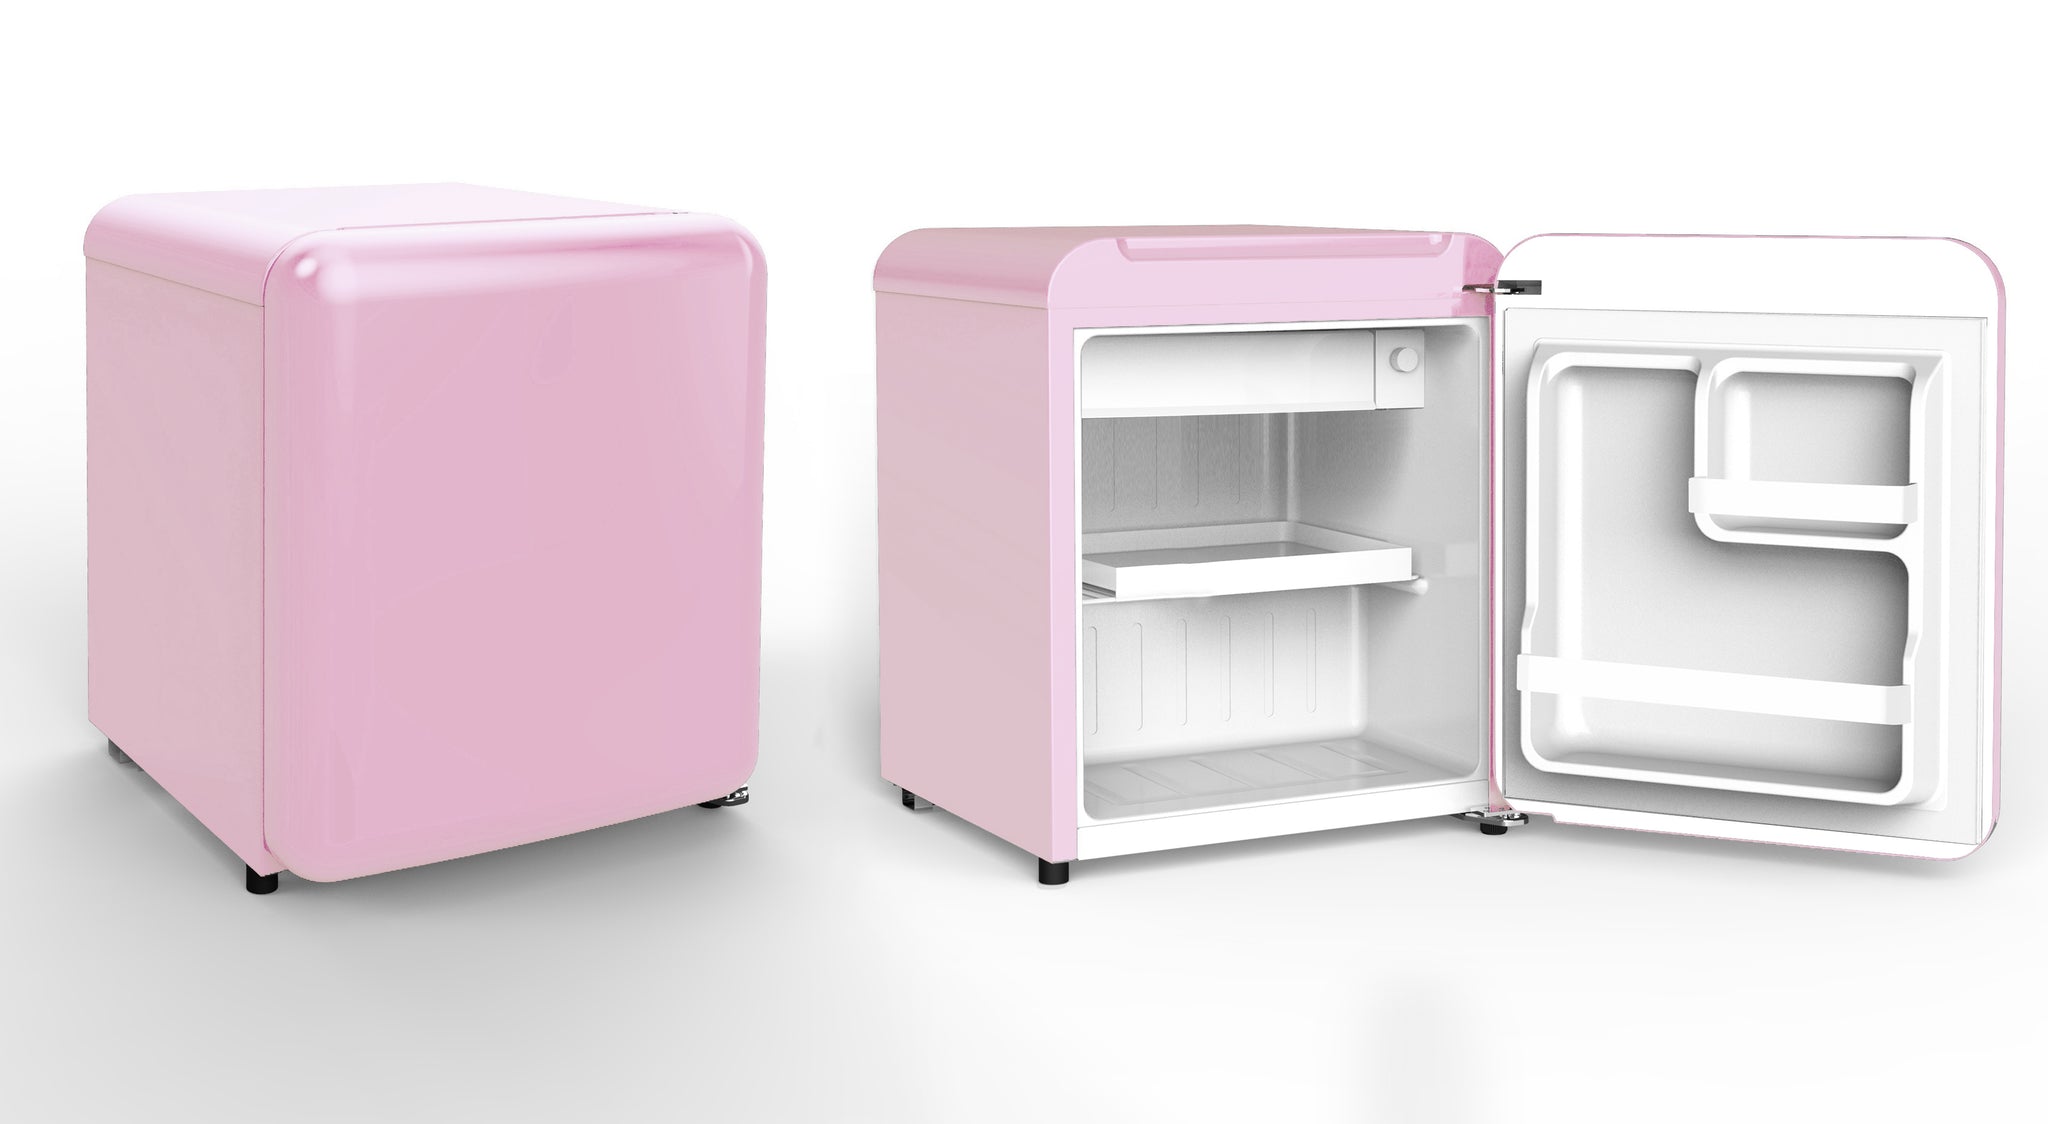 Linarie | Chatel 48L Pink Retro Mini Fridge with Built-In Freezer Compartment LK48MBPINK